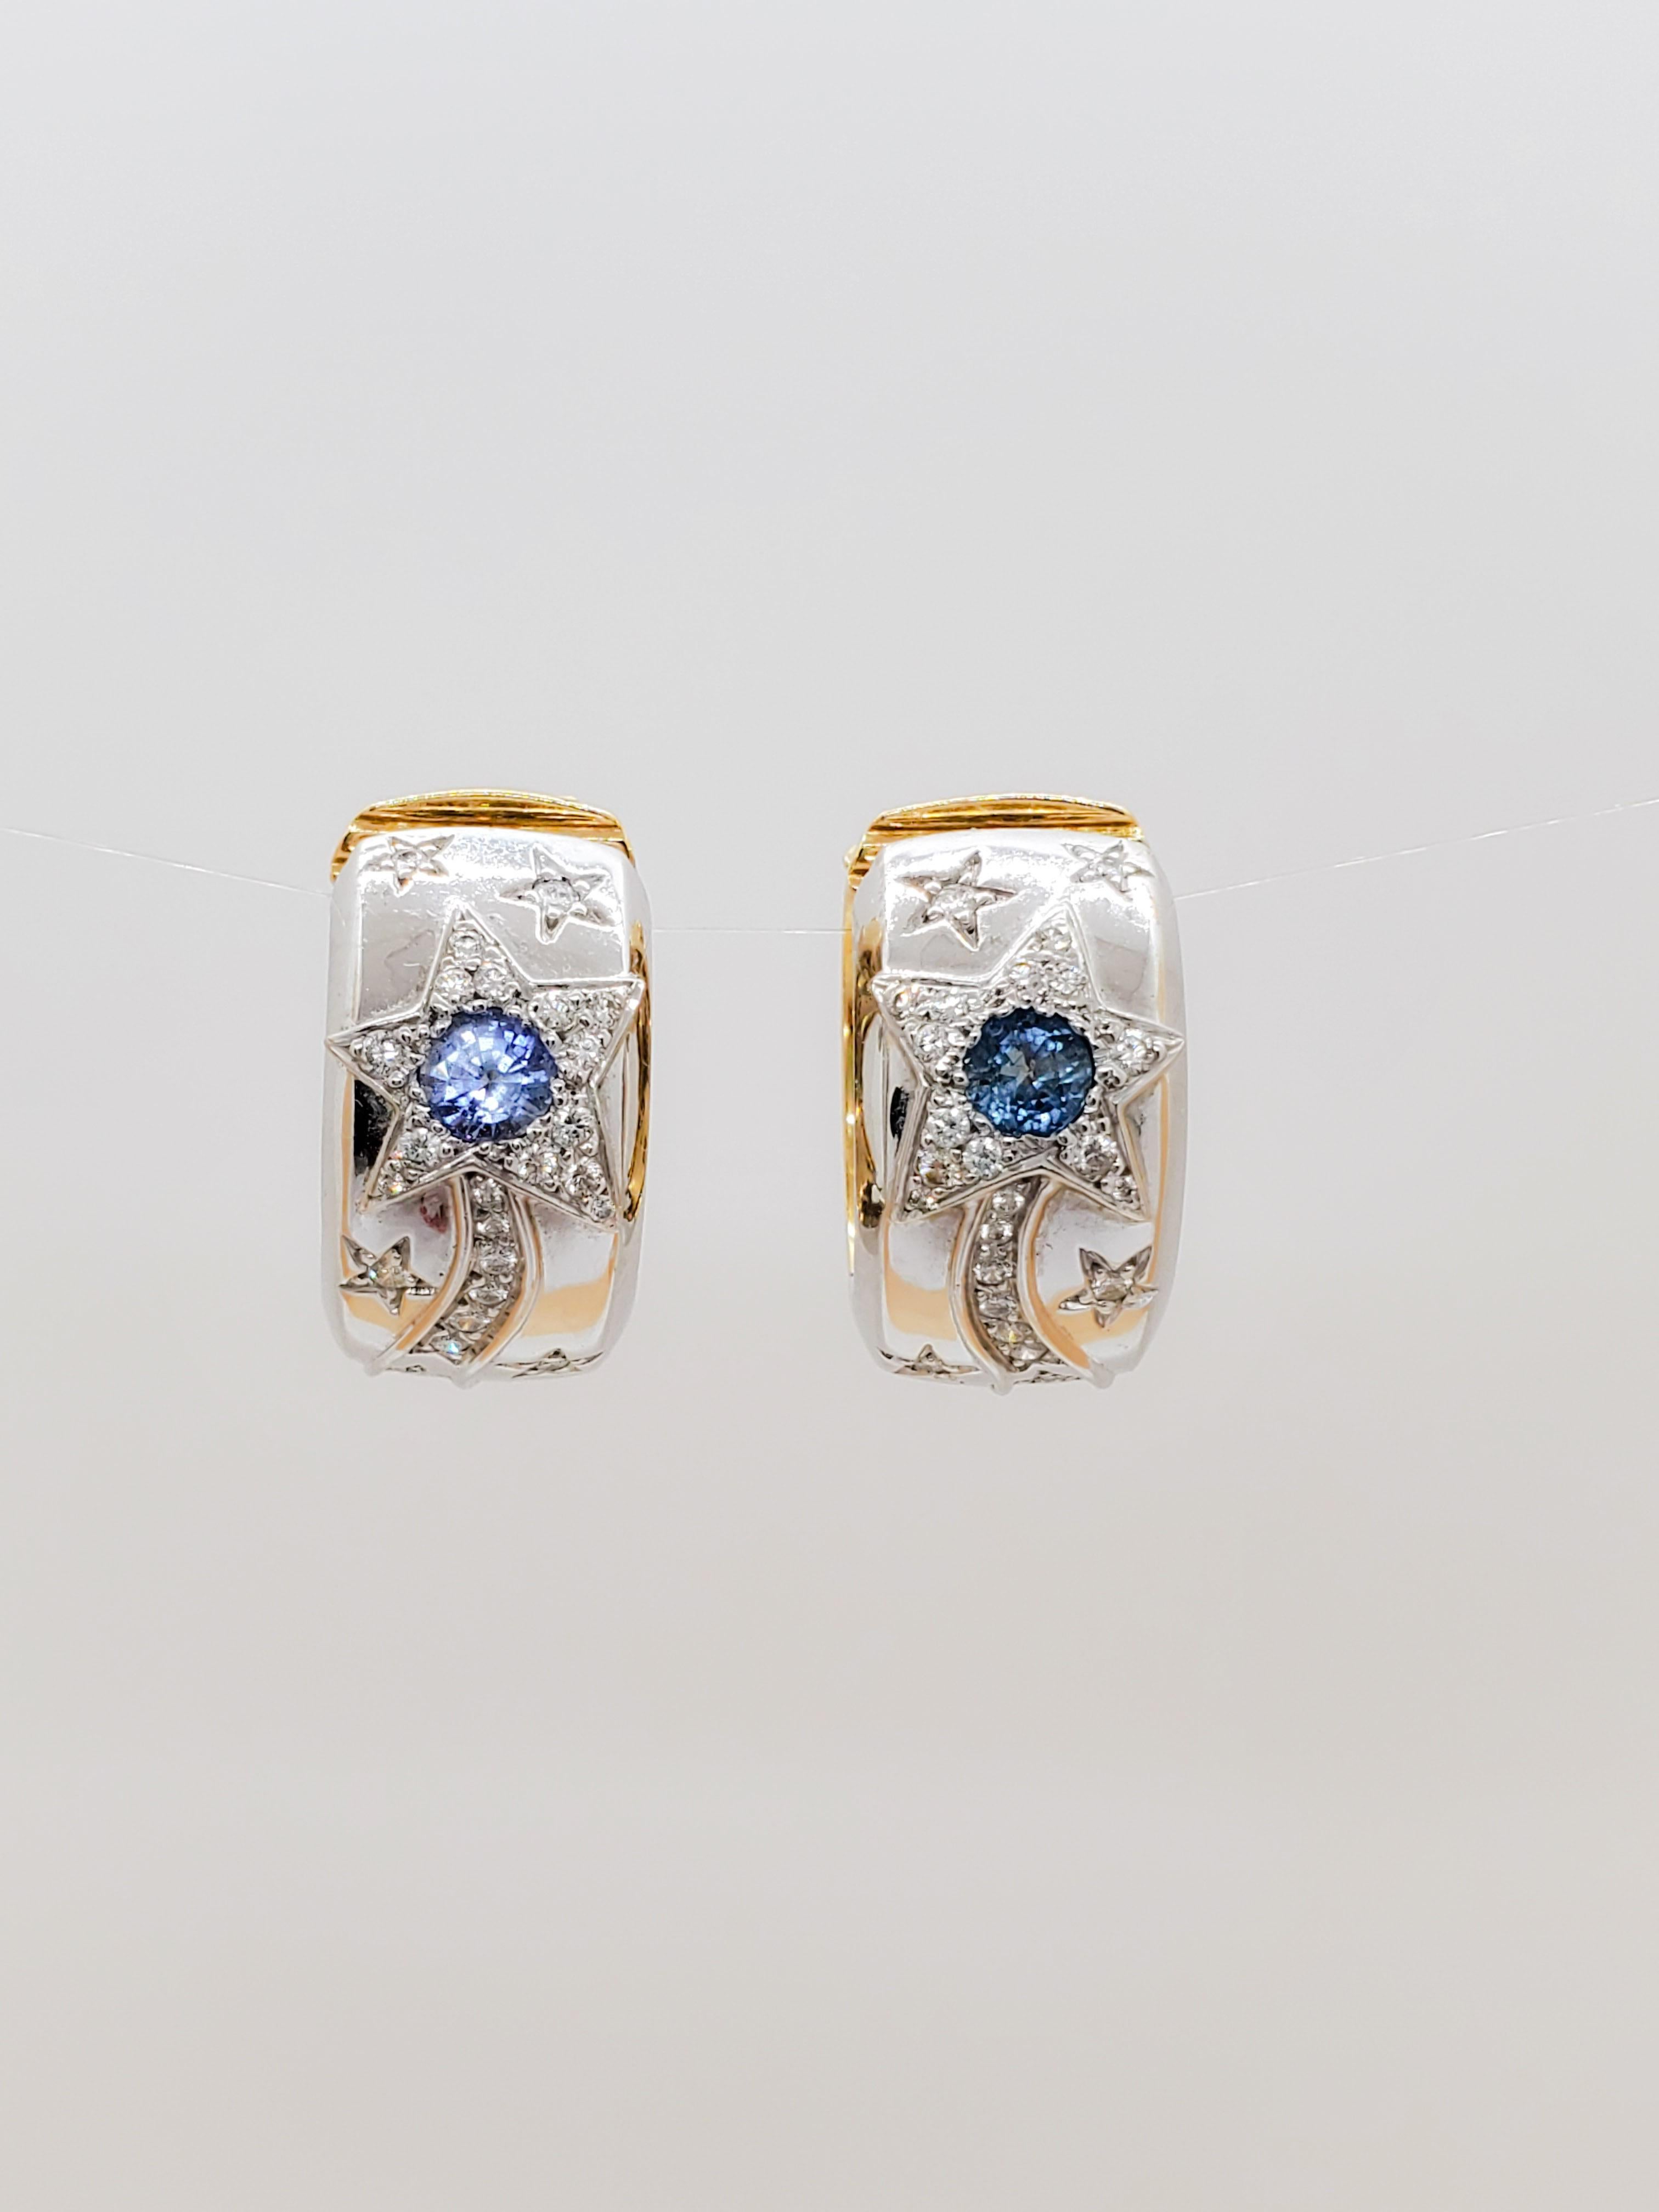 Chanel Blue Sapphire, Yellow Sapphire, and Diamond Day and Night Earrings in 18k 2